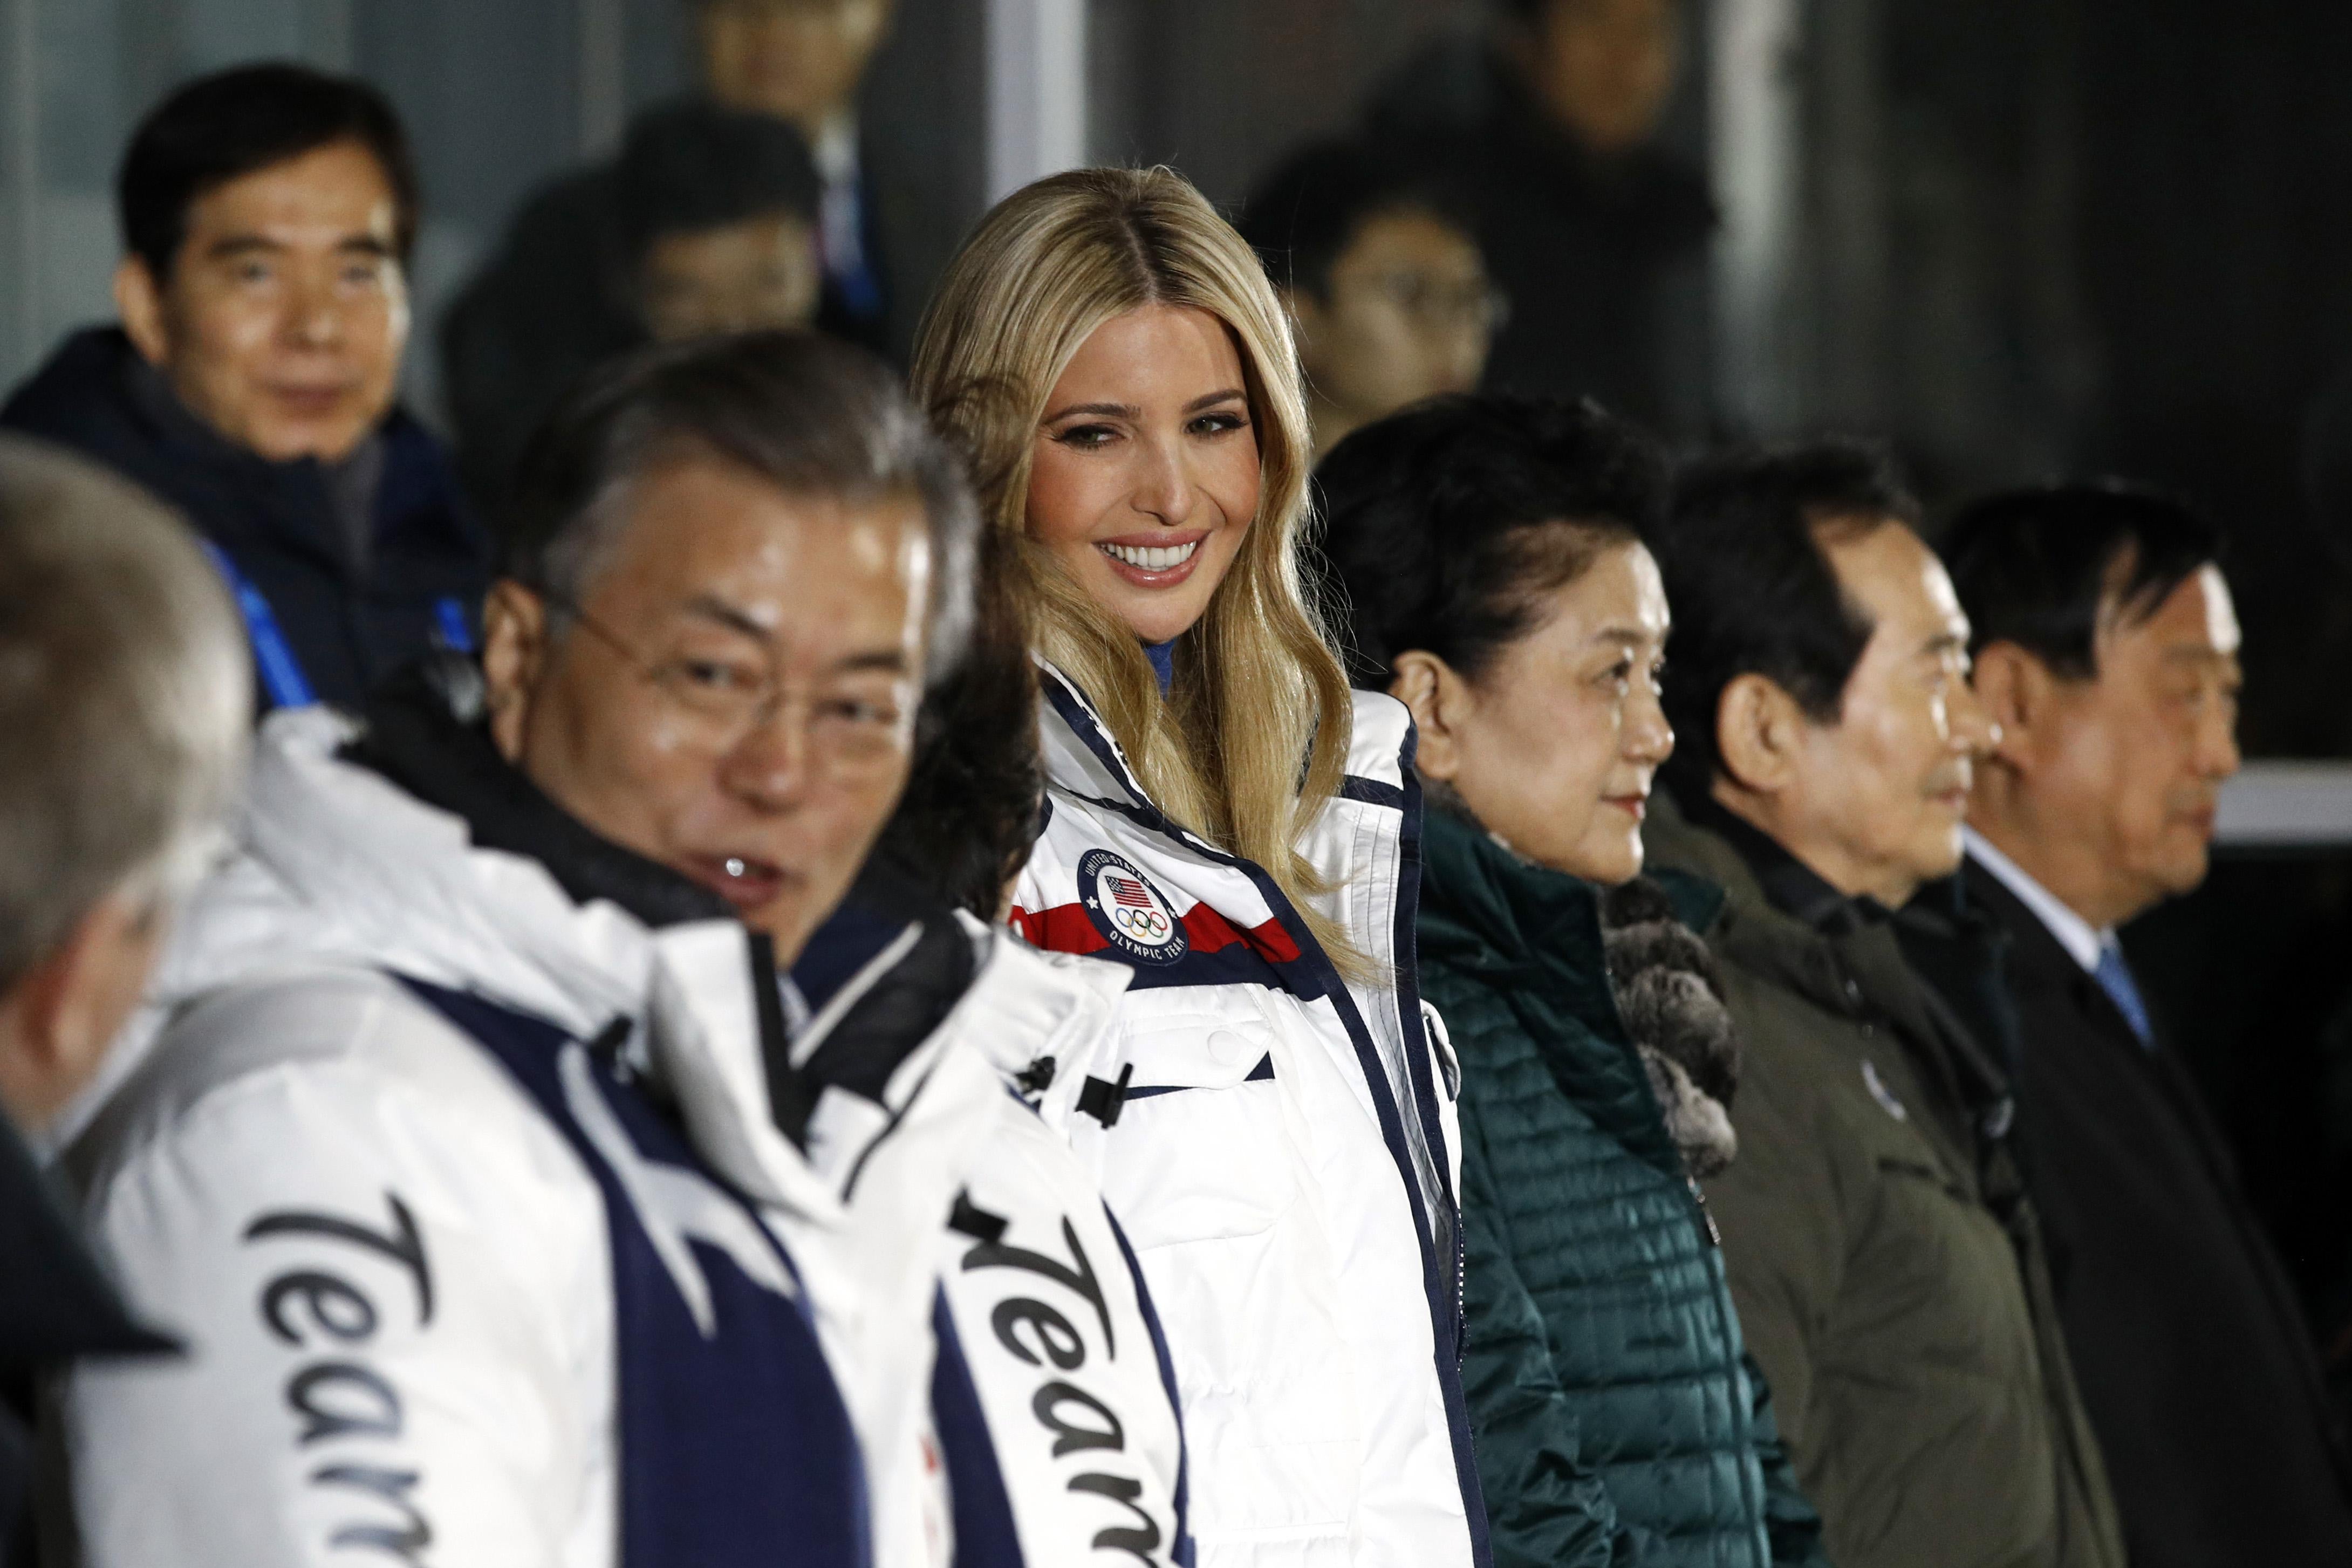 South Korea's President Moon Jae-in and senior White House adviser Ivanka Trump attend the closing ceremony of the Pyeongchang 2018 Winter Olympic Games.